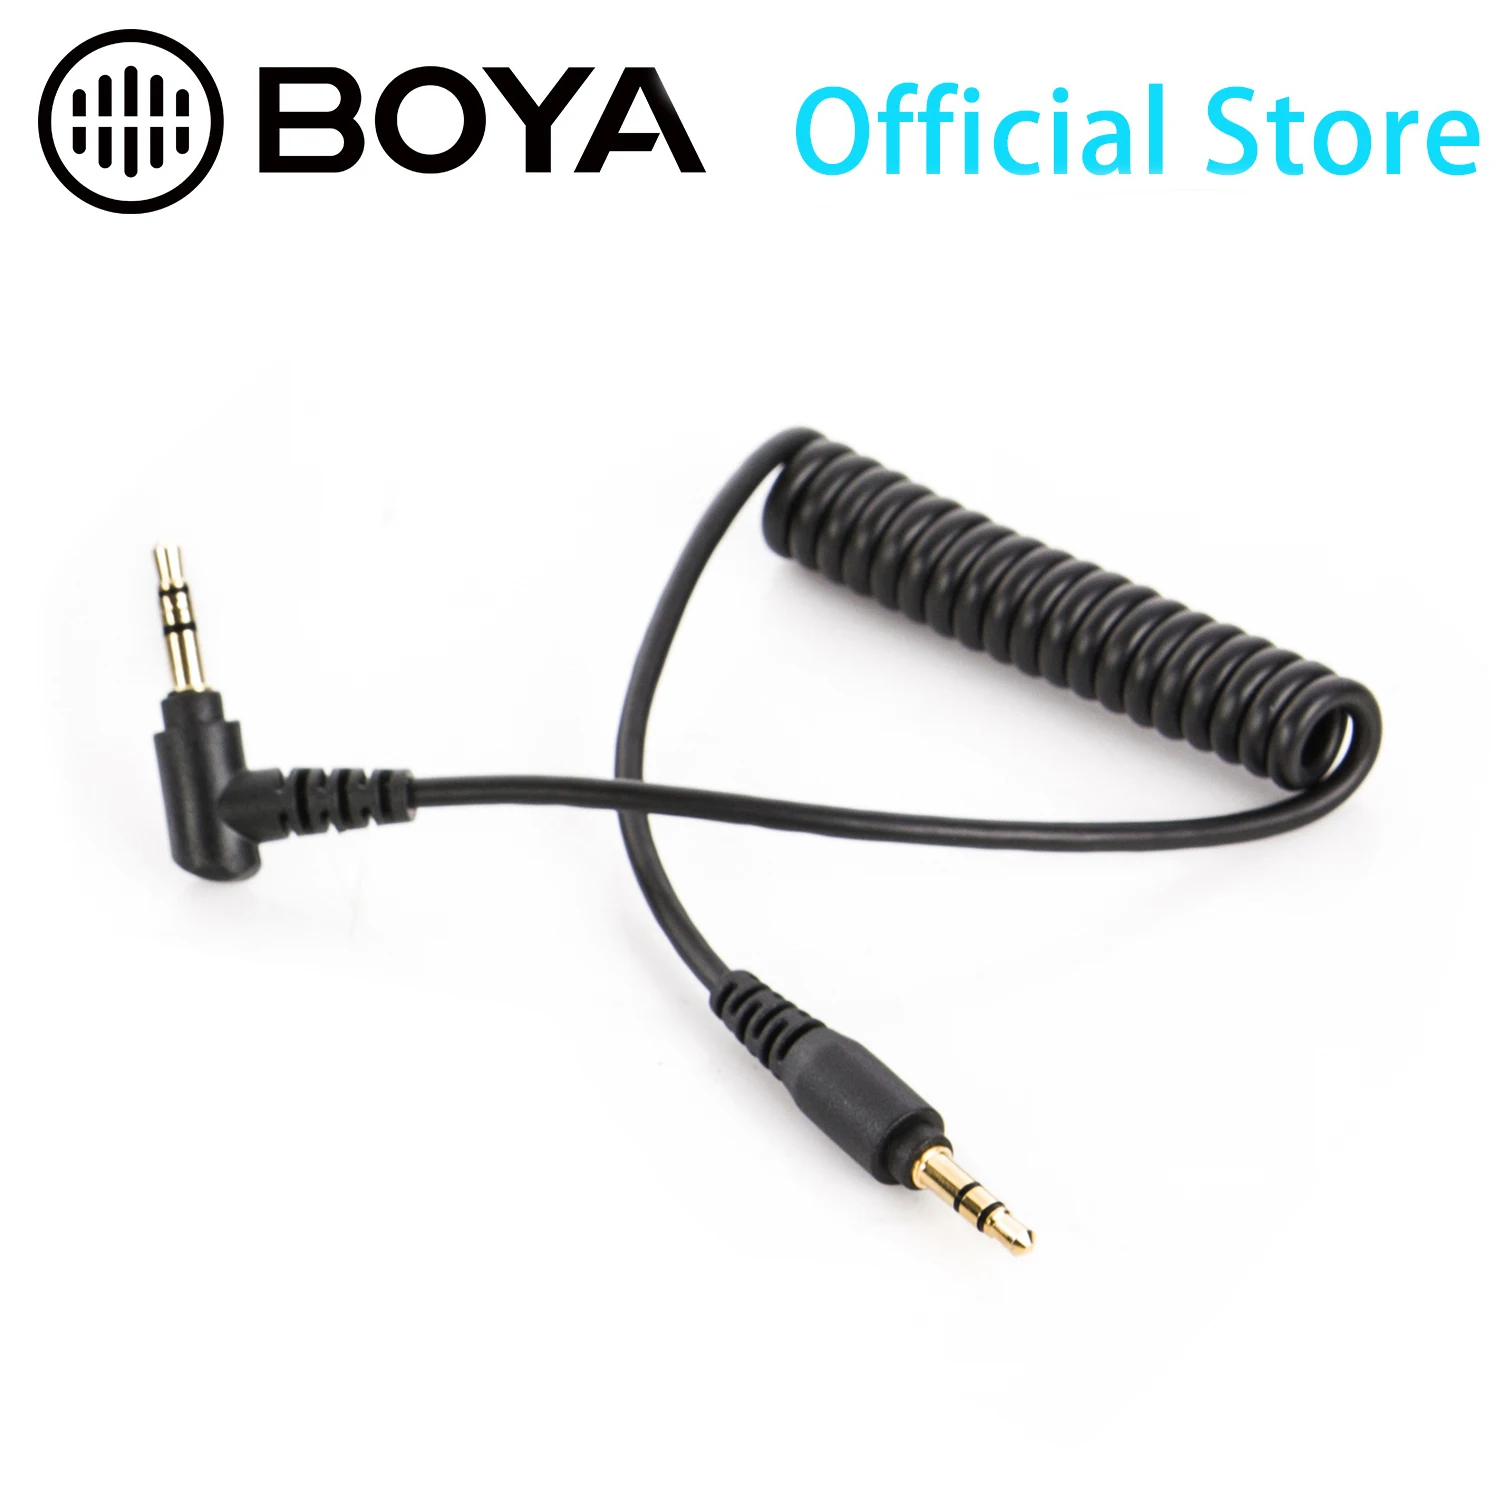 

BOYA BY-MM1 Cables 3.5mm TRS TRRS Connector for Cardioid Shotgun Microphone for Smartphones Camera Camcorders Audio Recorders